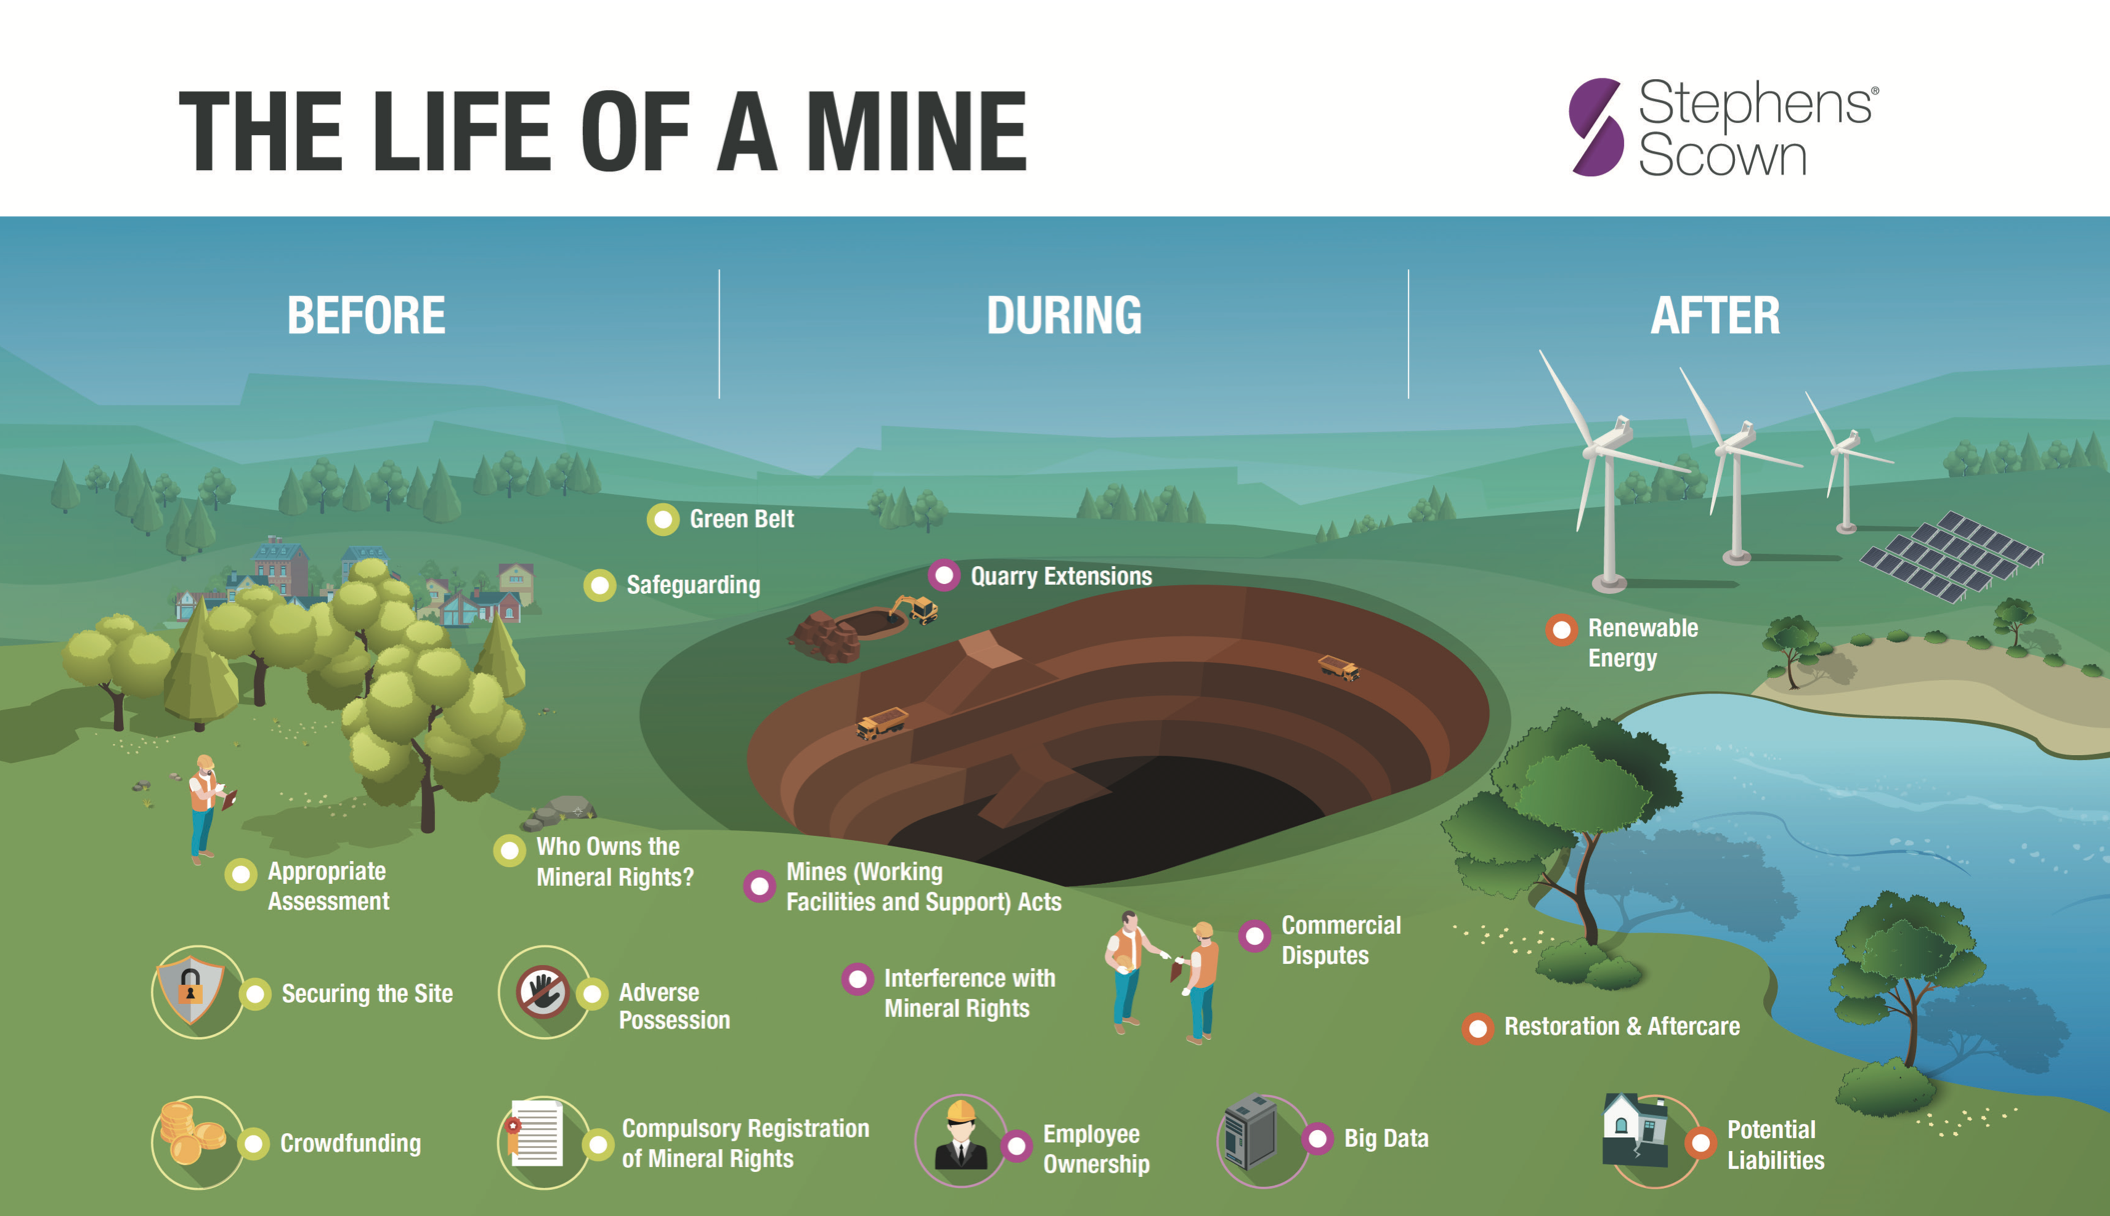 Stephens Scown graphic visualising the lifecycle of a mine